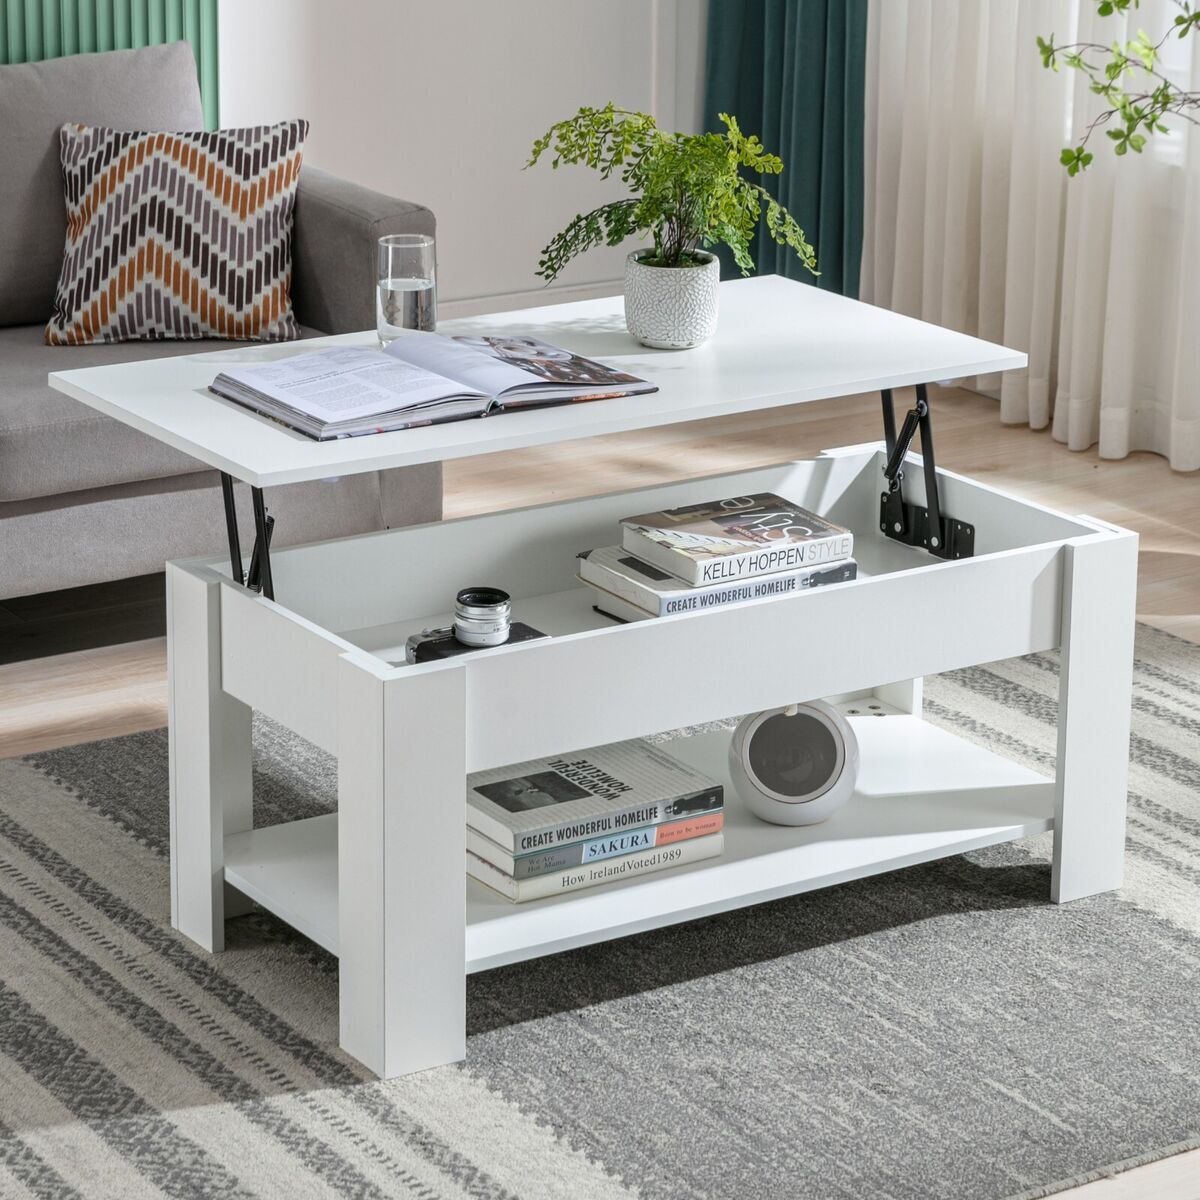 Lift Top Wooden Coffee Table With Storage White Lift Up Desk Drawer Living  Room | Ebay Regarding Lift Top Coffee Tables With Storage Drawers (View 2 of 15)